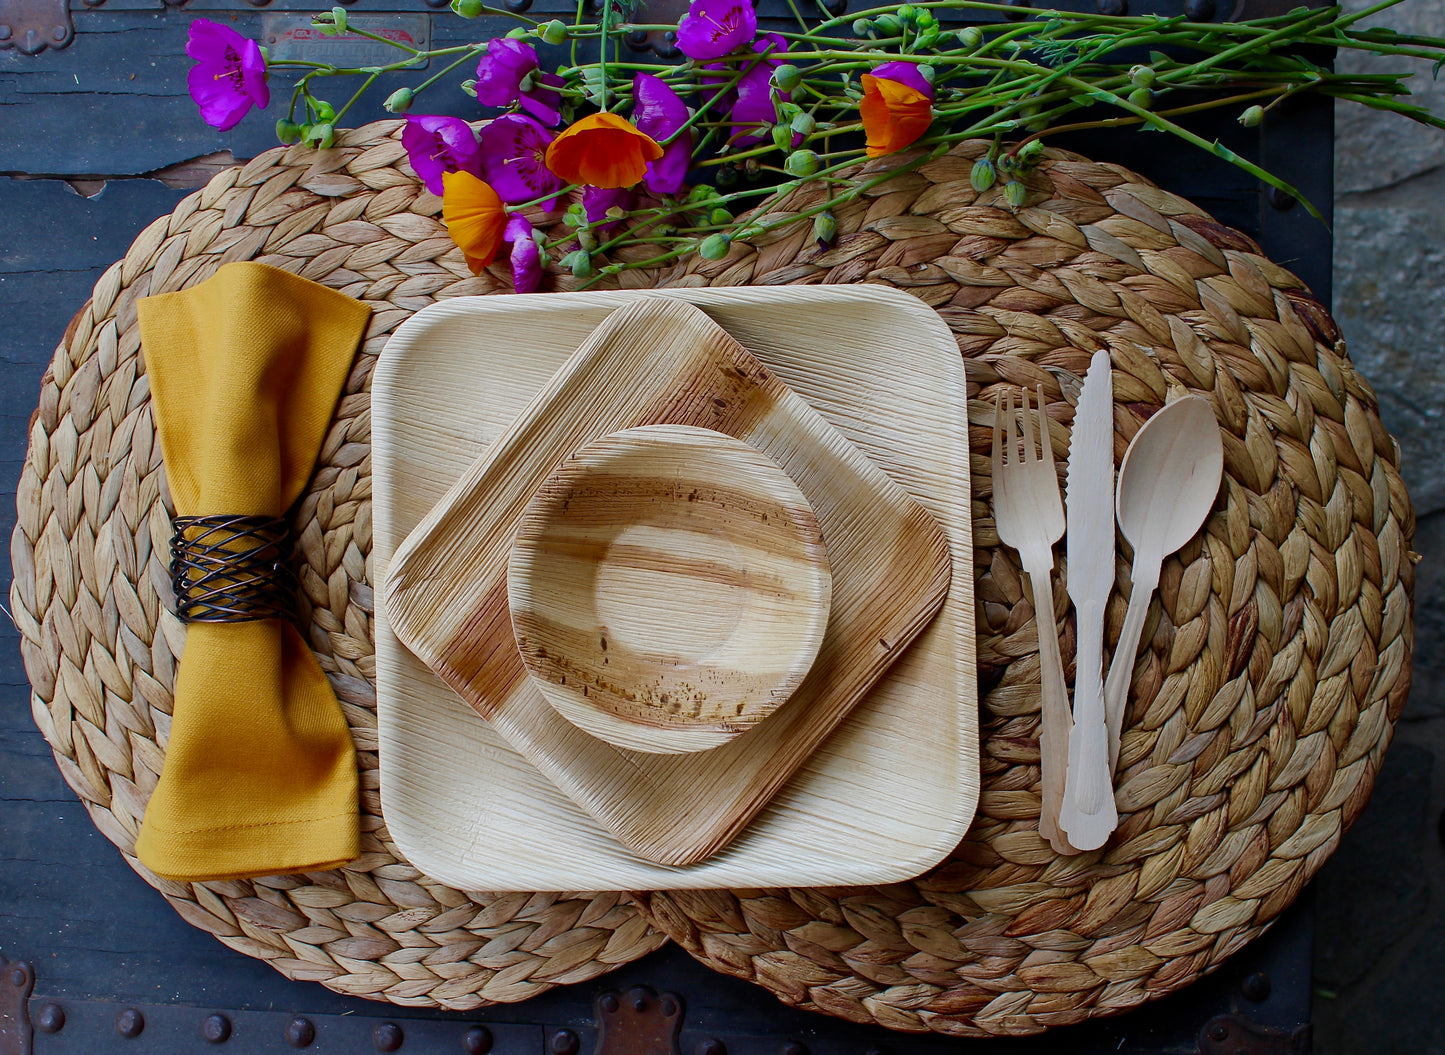 Bamboo Type Palm Leaf 25 Pic 10" Round  - 25 pice Heart 6"- 25  pic  cup  - 75 pic Cutlery - 50 Pic Napkin